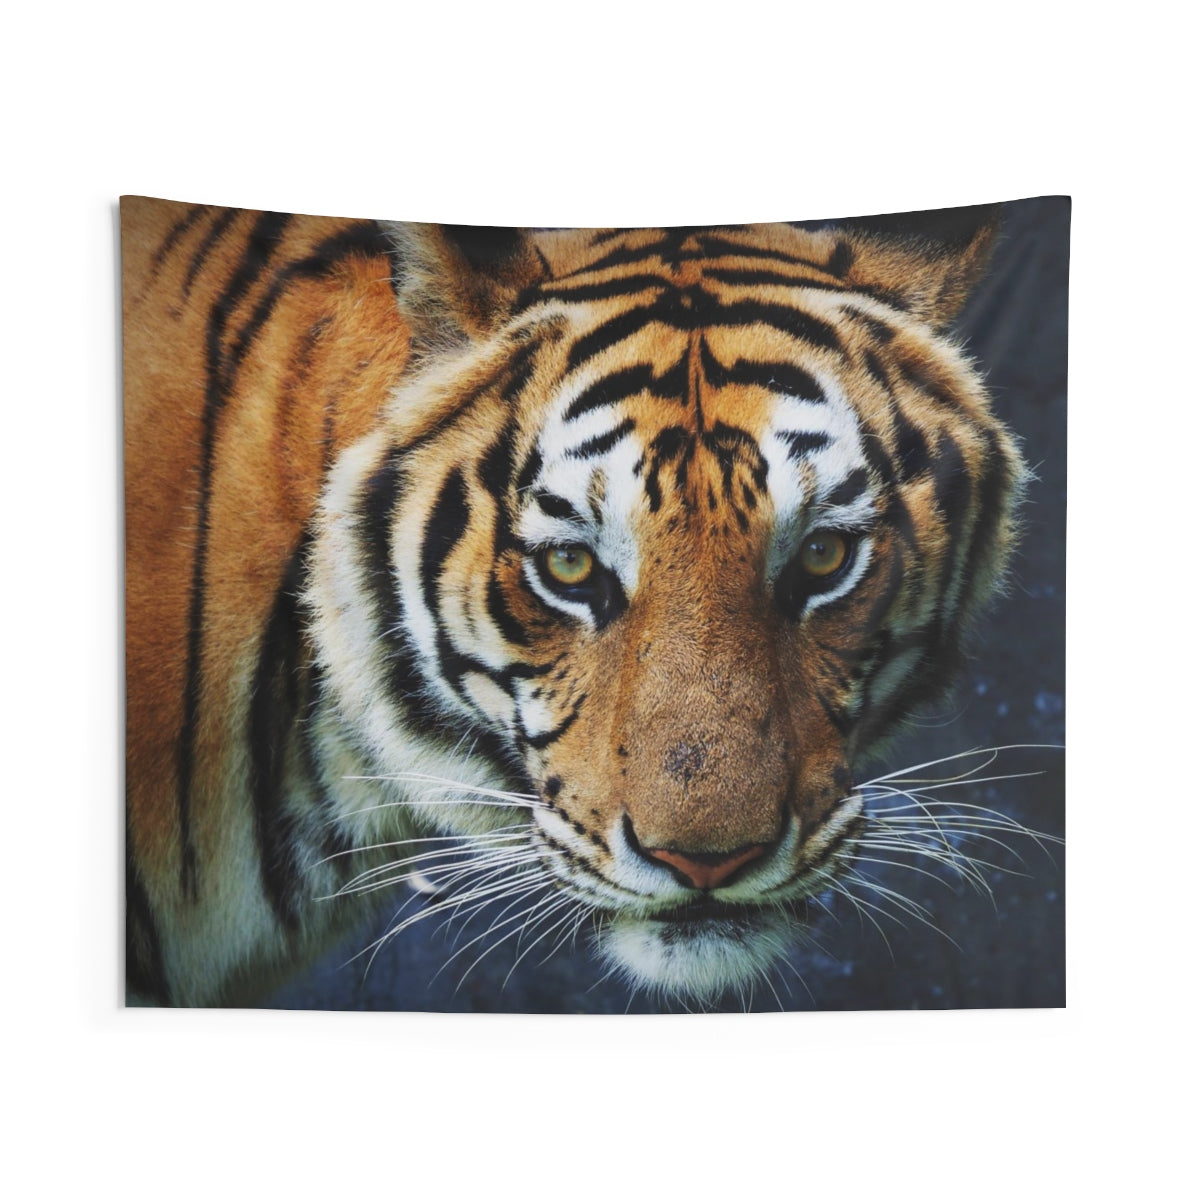 Tiger Tapestry, Nature Indoor Animal Wall Art Hanging Print Tapestries, Big Cat Tiger Dorm Decor Gift Starcove Fashion